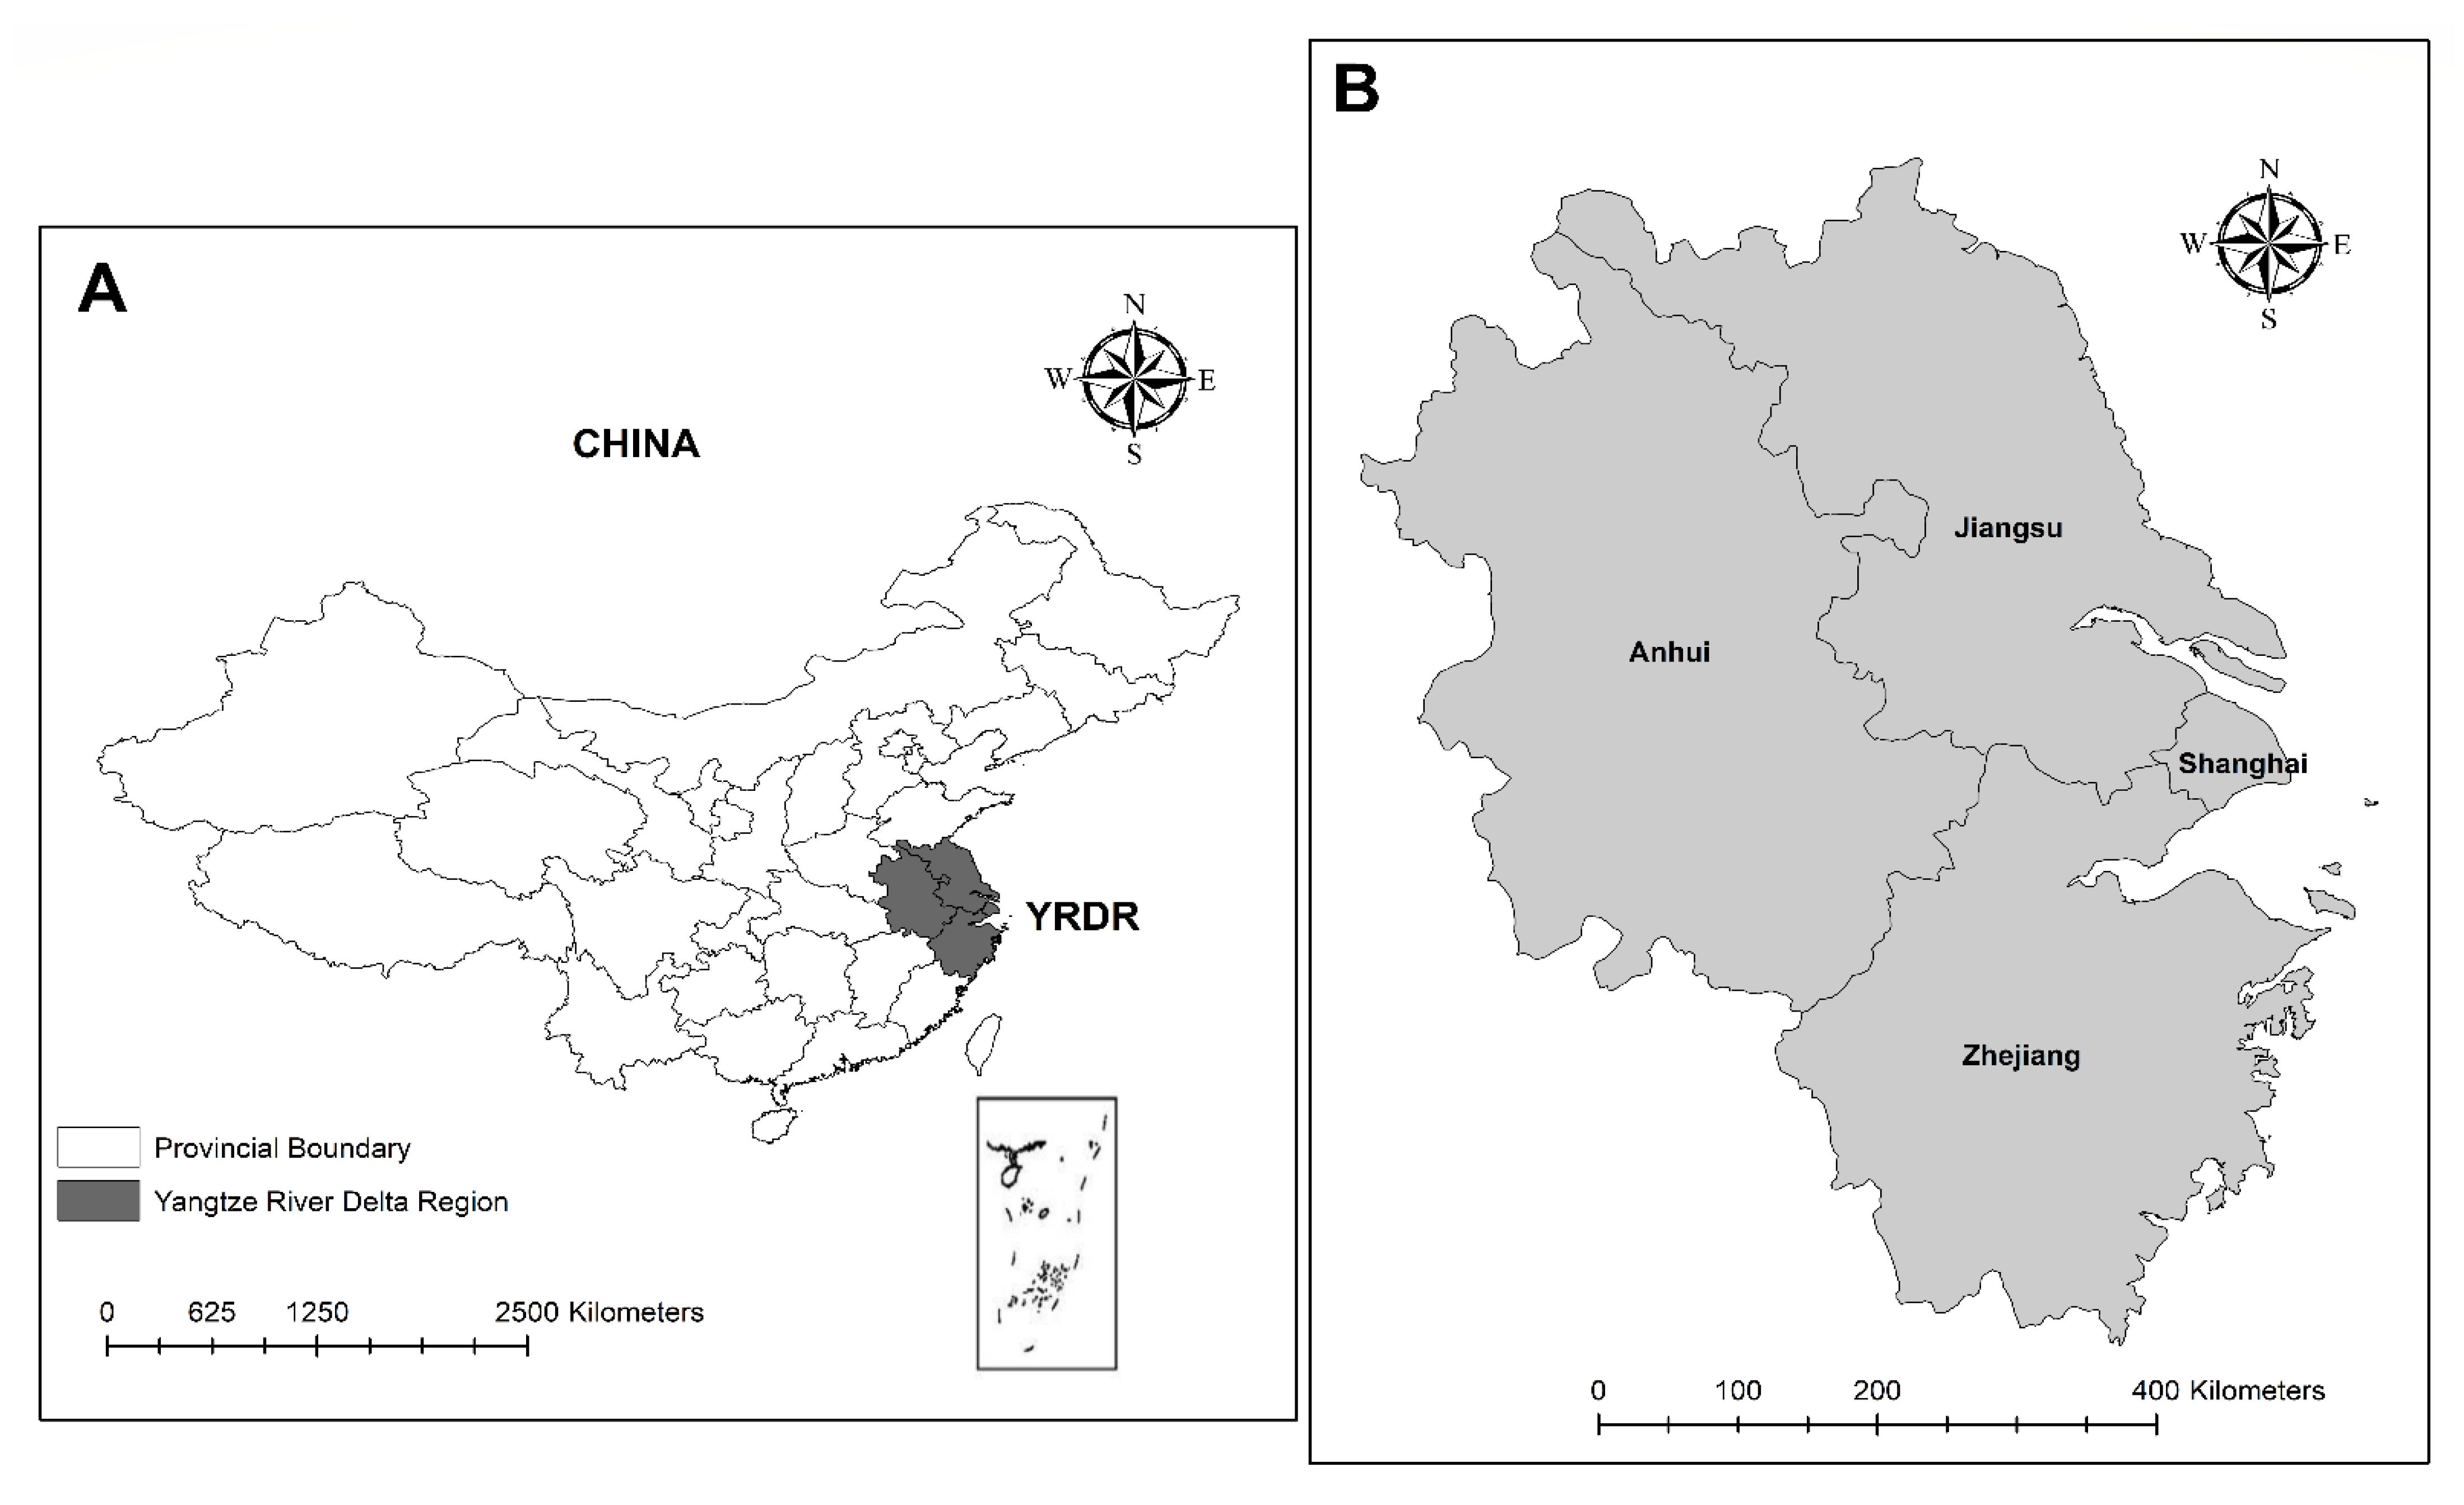 Energies Free Full Text Solar Energy Potential In The Yangtze River Delta Region A Gis Based Assessment Html